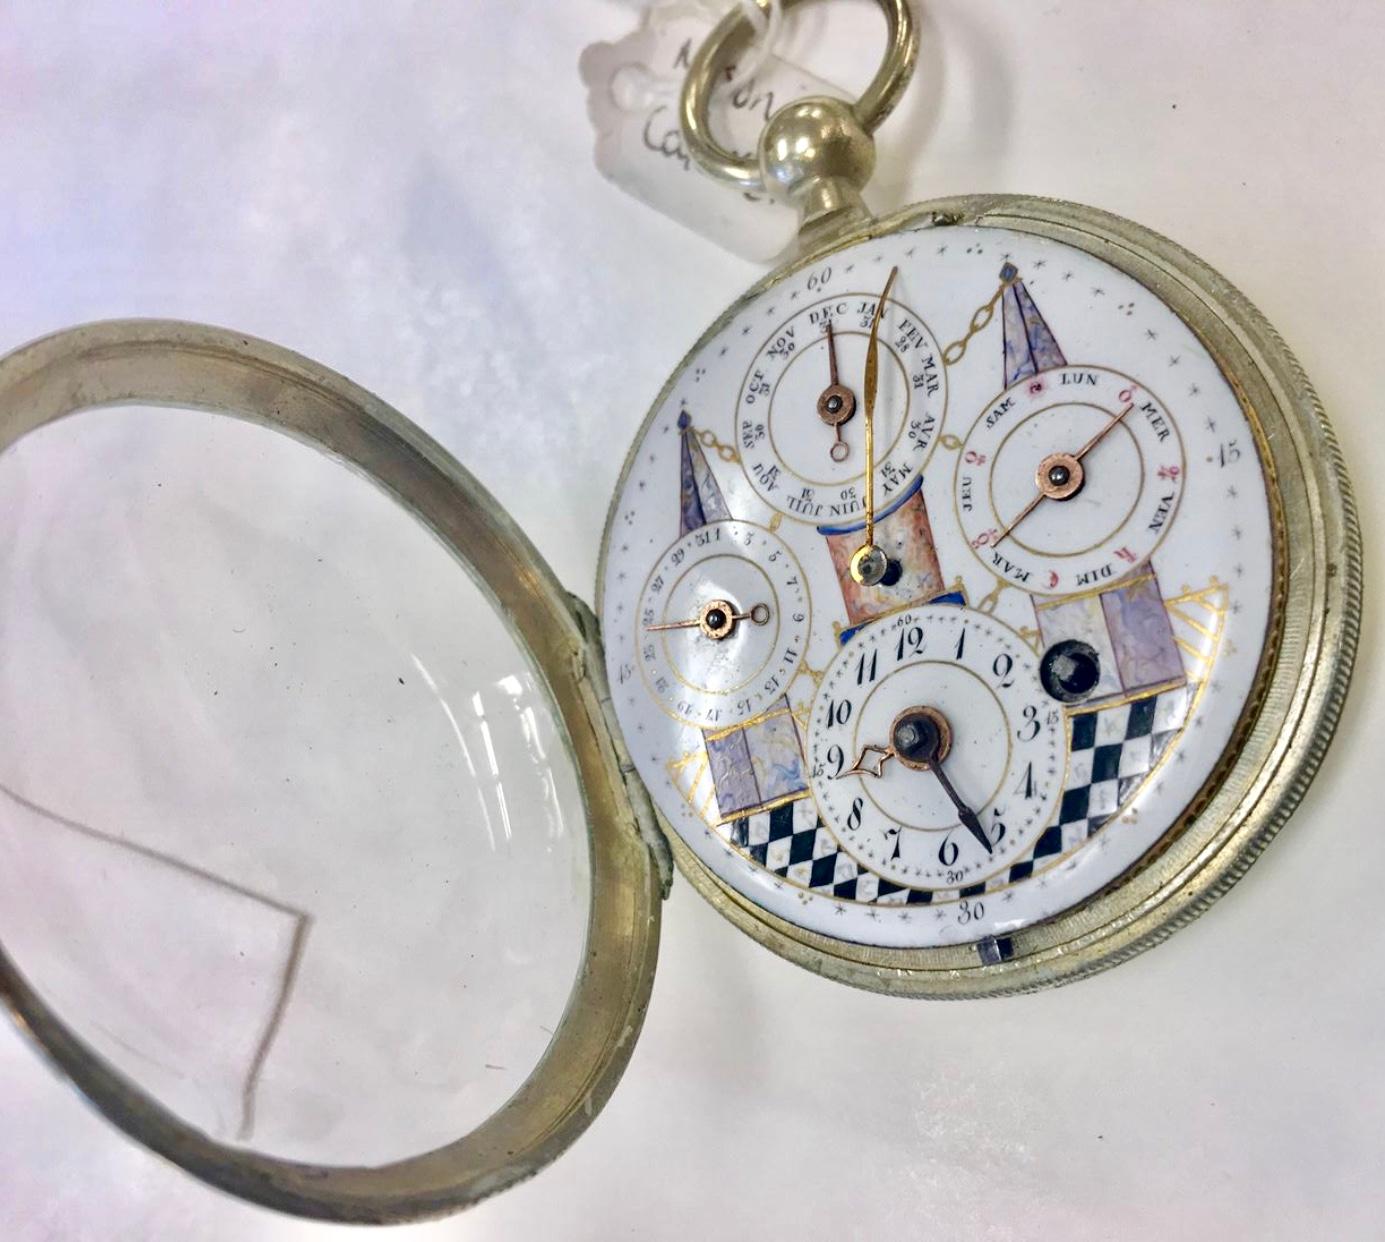 A beautiful handcrafted enamel dial, masonic calendar key winding Pocket watch. It has a fusee movement. Full working order. Circa 1880